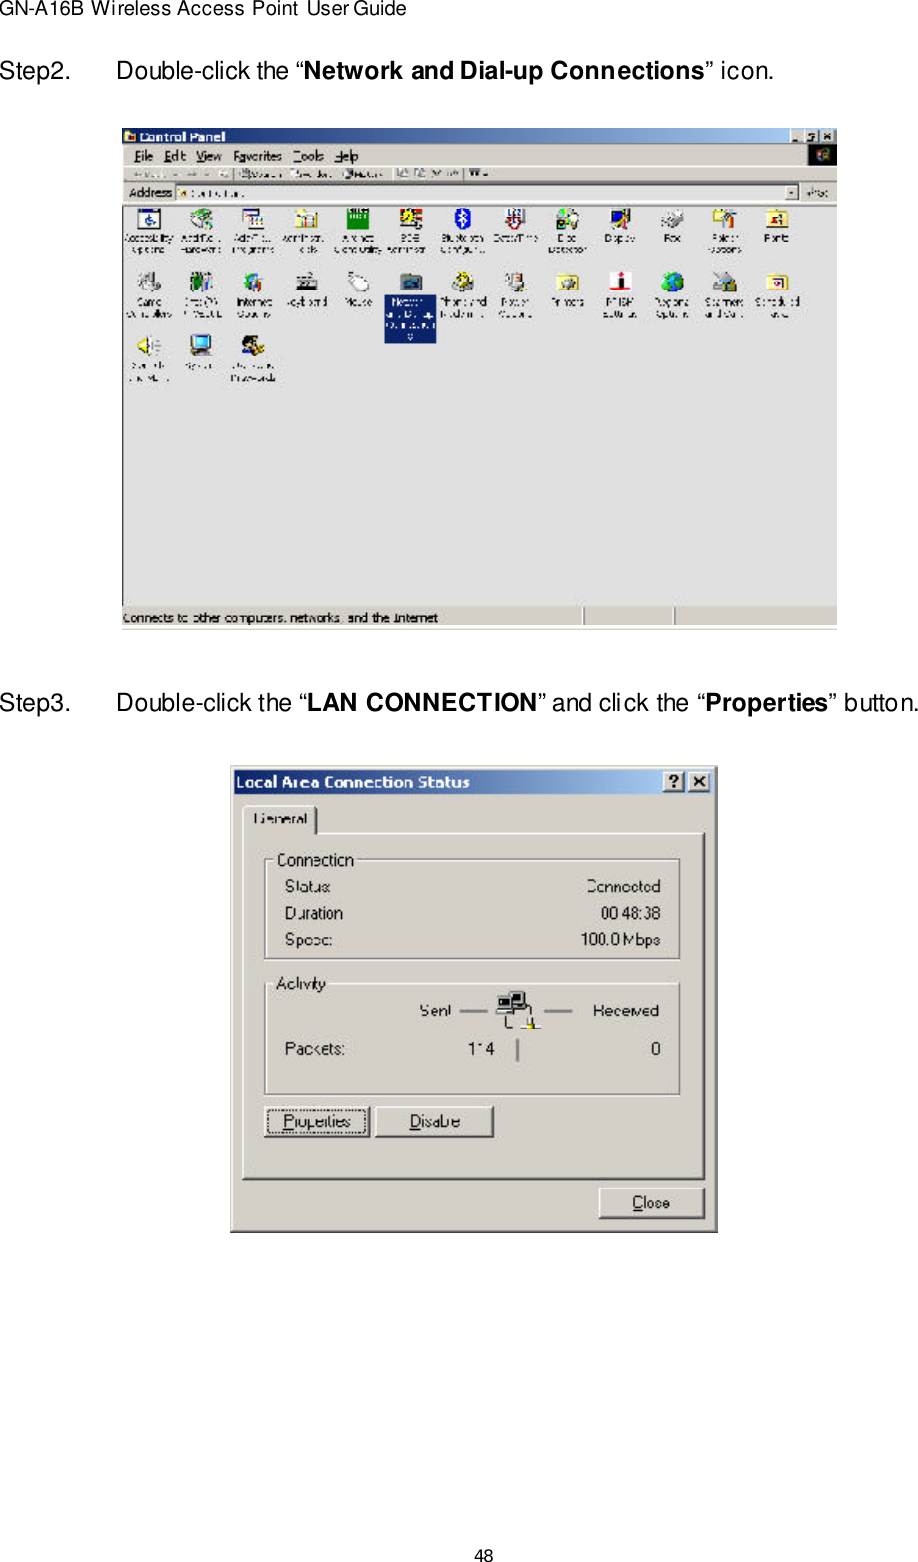 48GN-A16B Wireless Access Point User GuideStep2.Double-click the “Network and Dial-up Connections” icon.Step3.Double-click the “LAN CONNECTION” and click the “Properties” button.